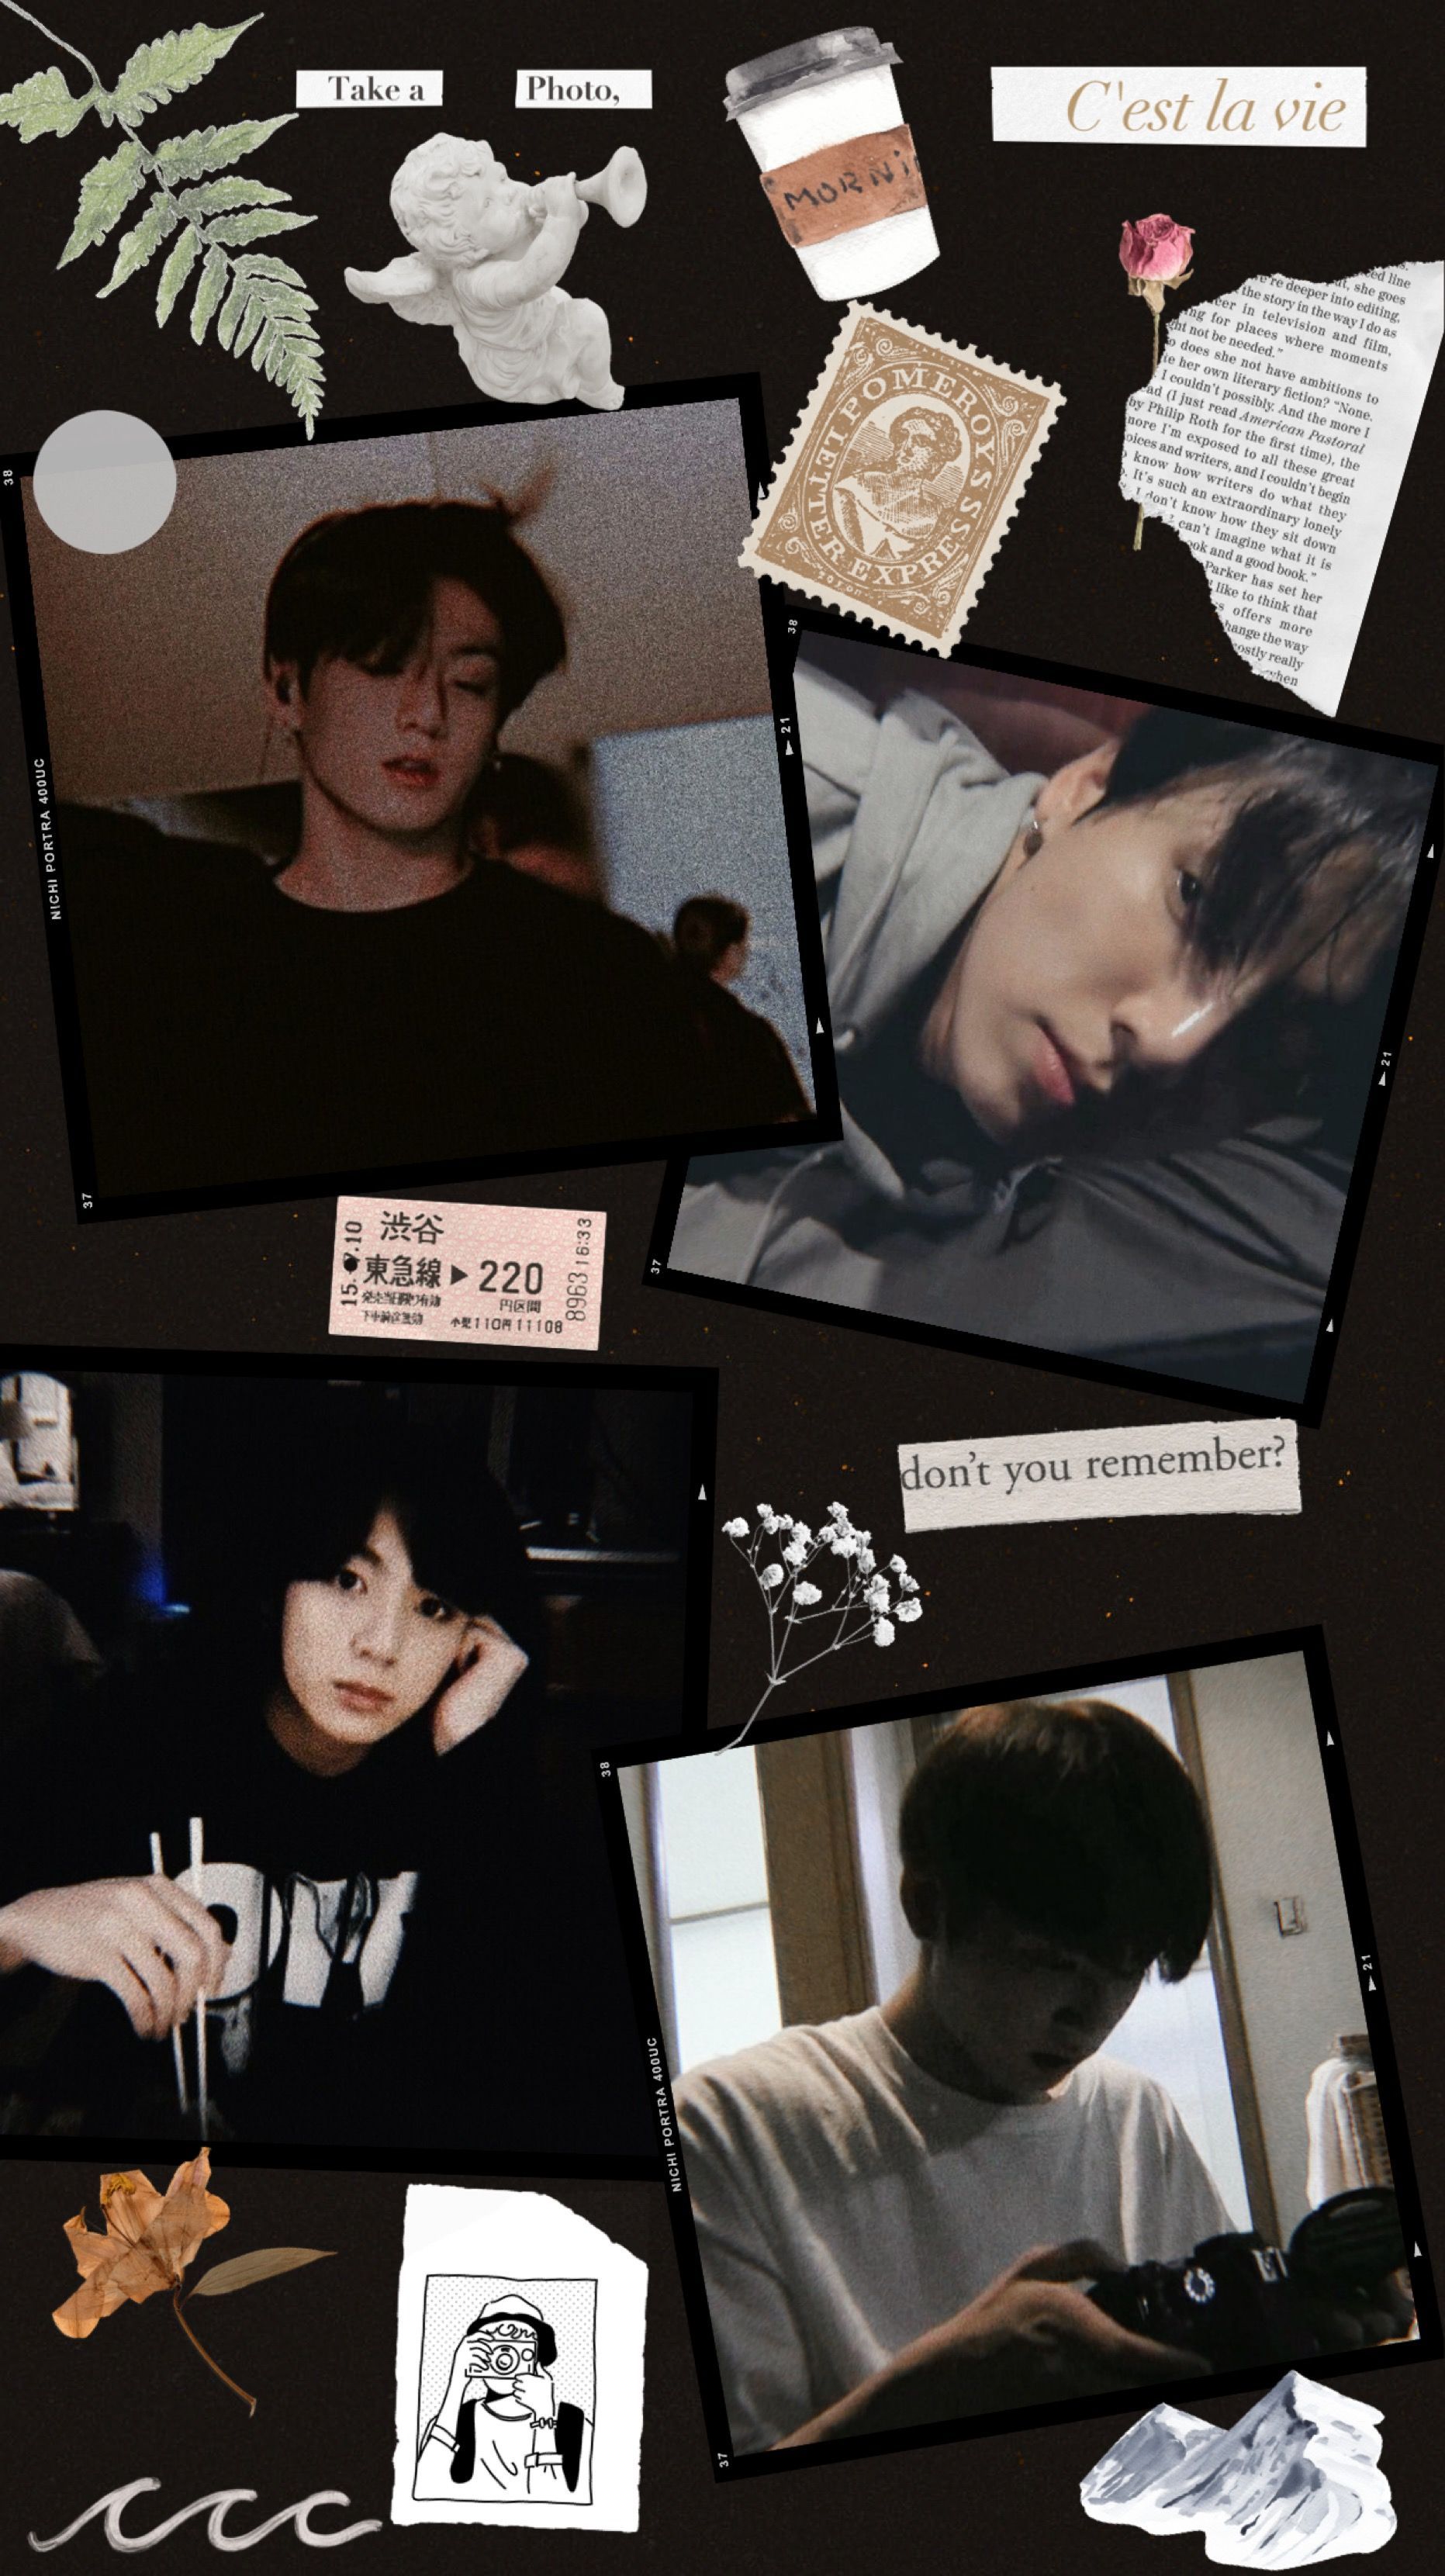 A collage of jimin and jungkook from bts - Jungkook